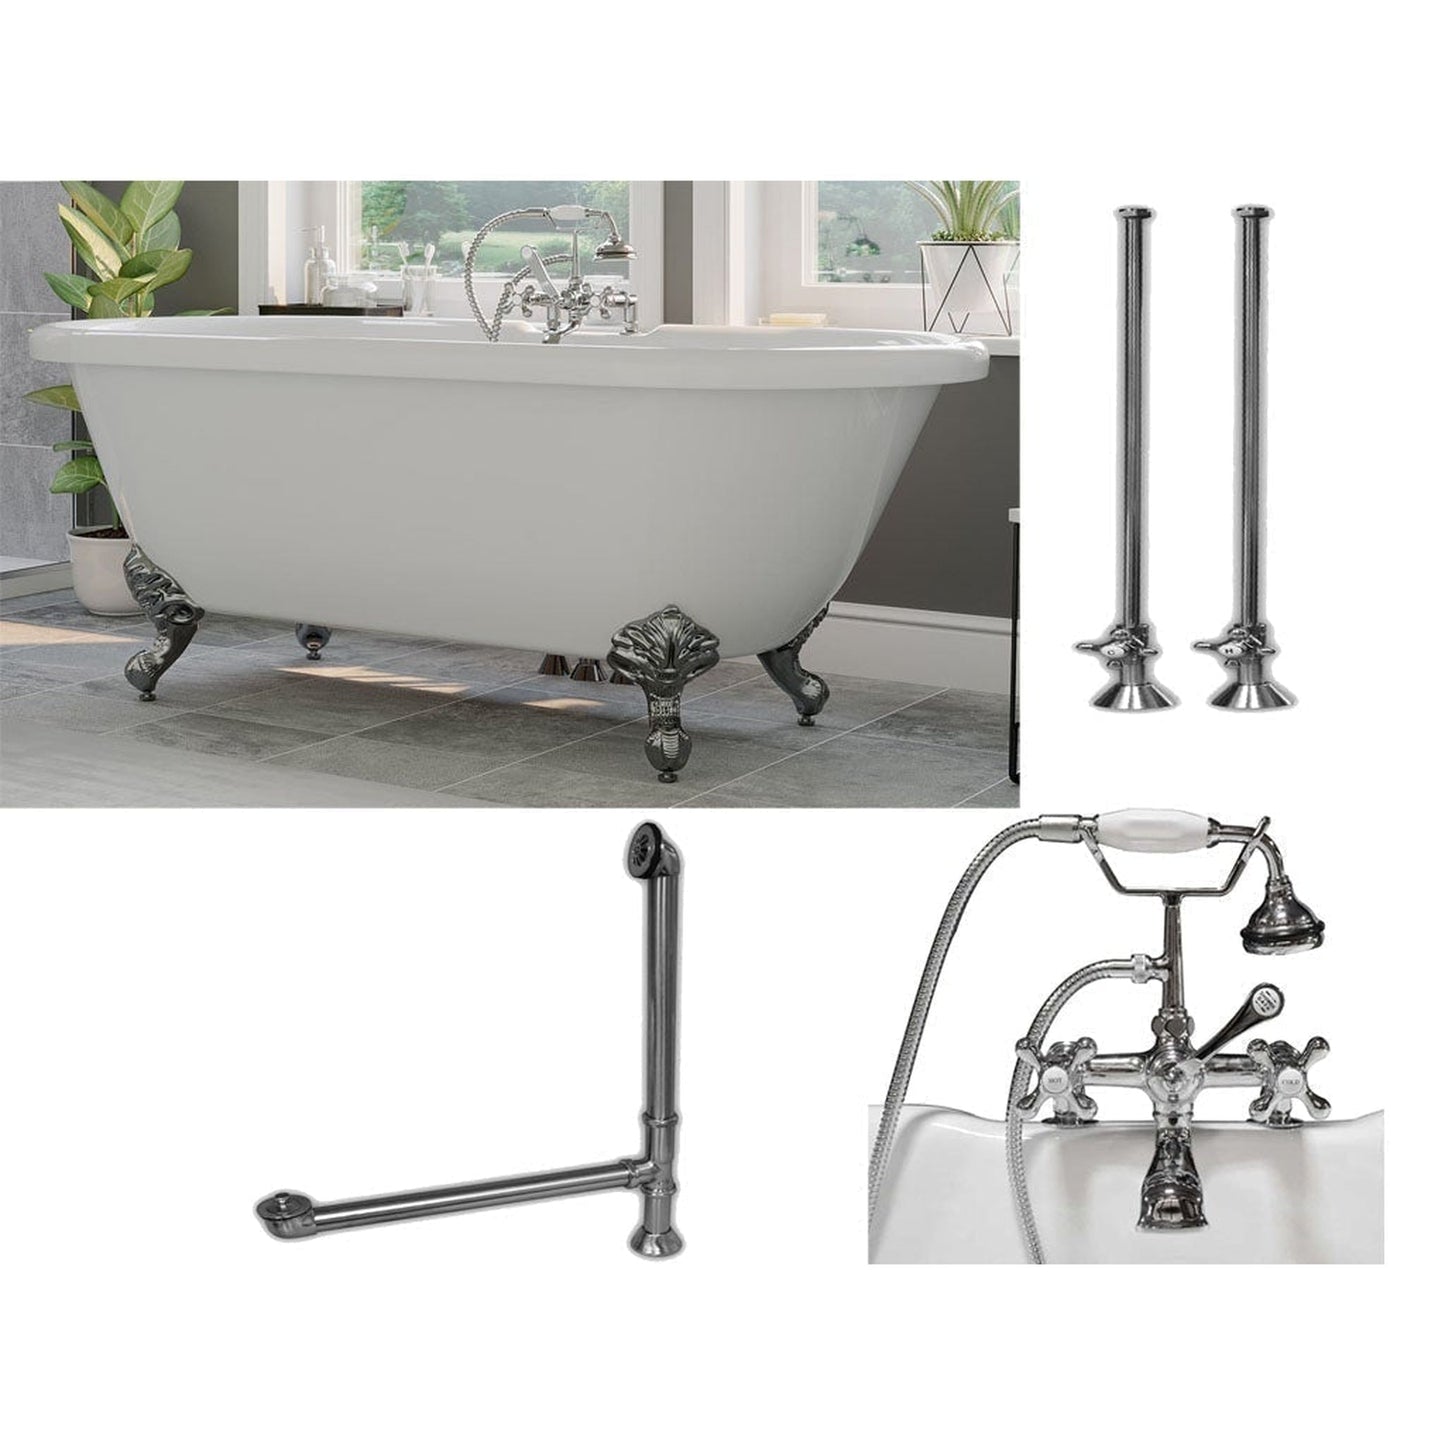 Cambridge Plumbing 60" White Acrylic Double Ended Clawfoot Bathtub With Deck Holes And Complete Plumbing Package Including 2” Riser Deck Mount Faucet, Supply Lines, Drain And Overflow Assembly In Polished Chrome